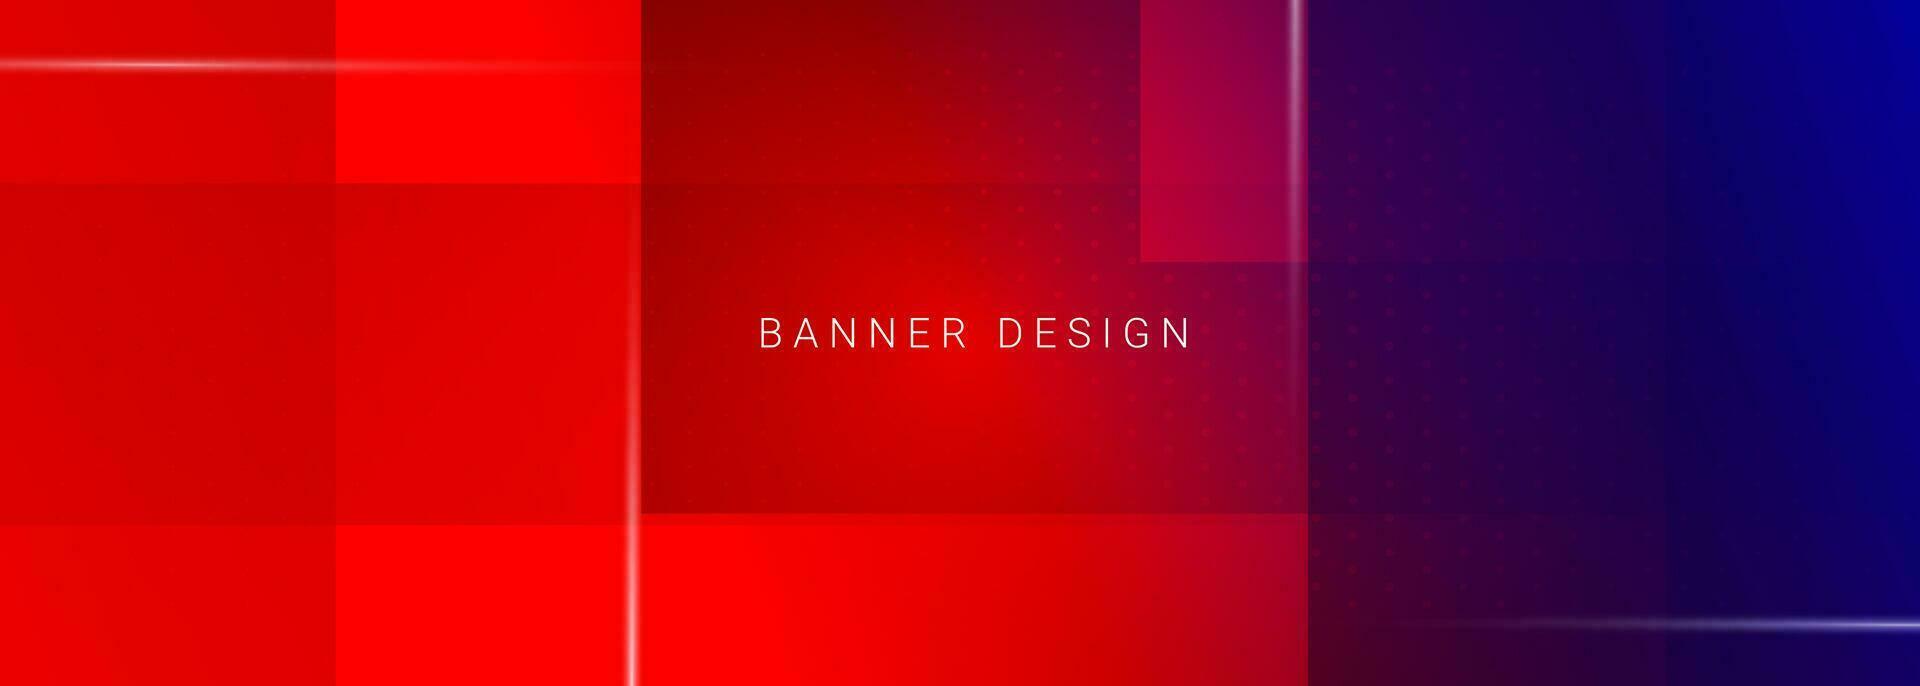 Abstract geometric design colorful pattern template banner design vector